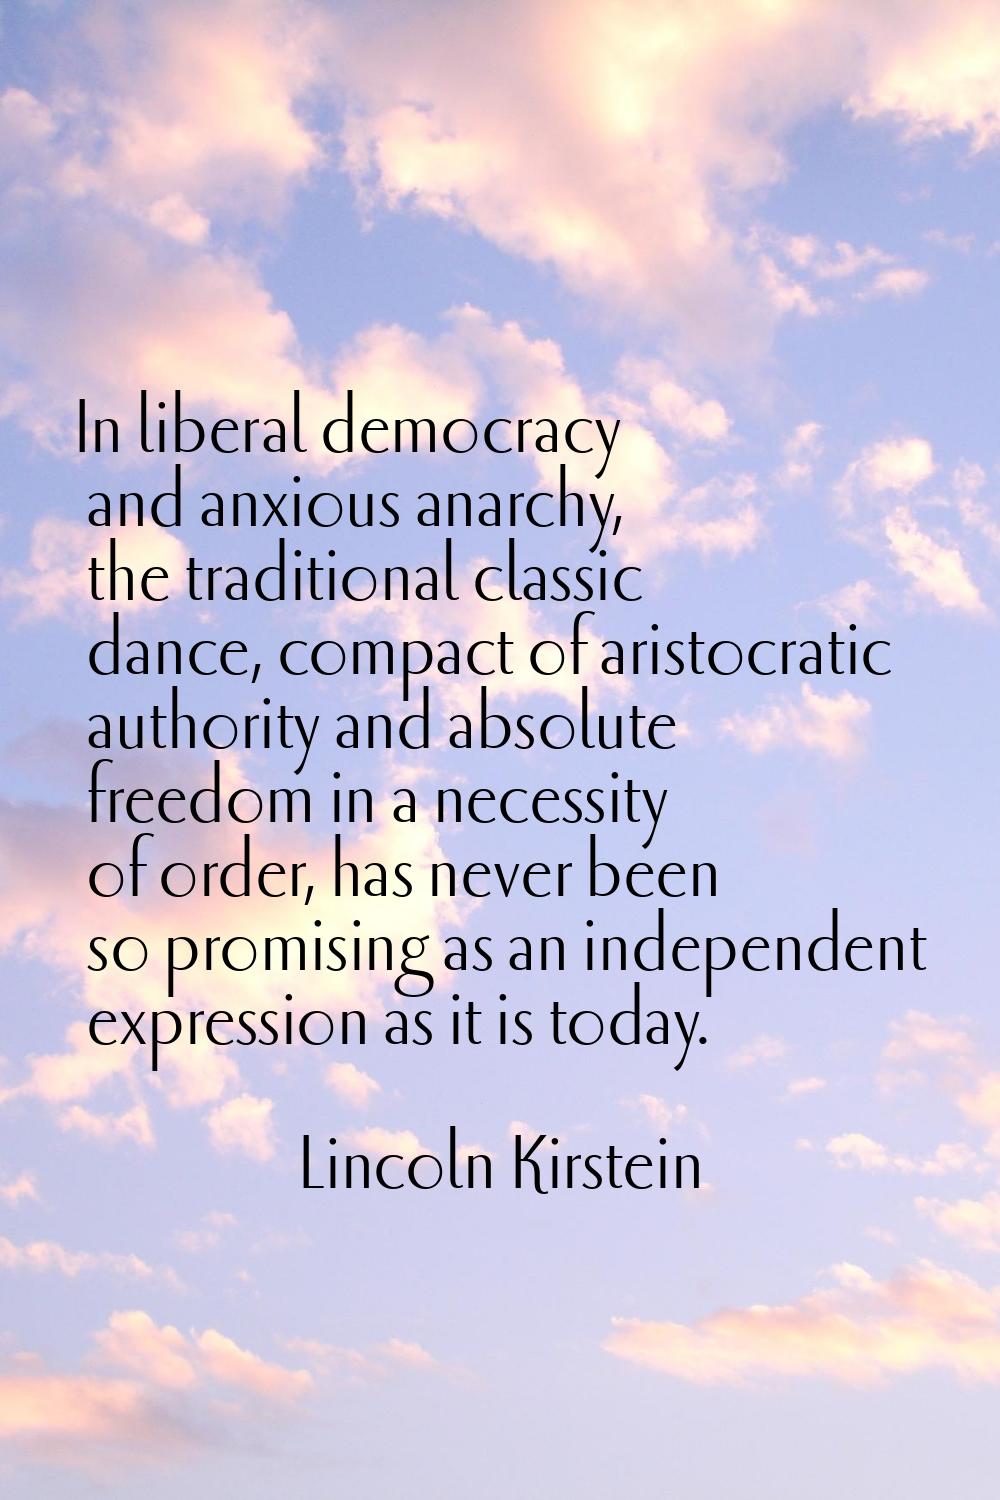 In liberal democracy and anxious anarchy, the traditional classic dance, compact of aristocratic au